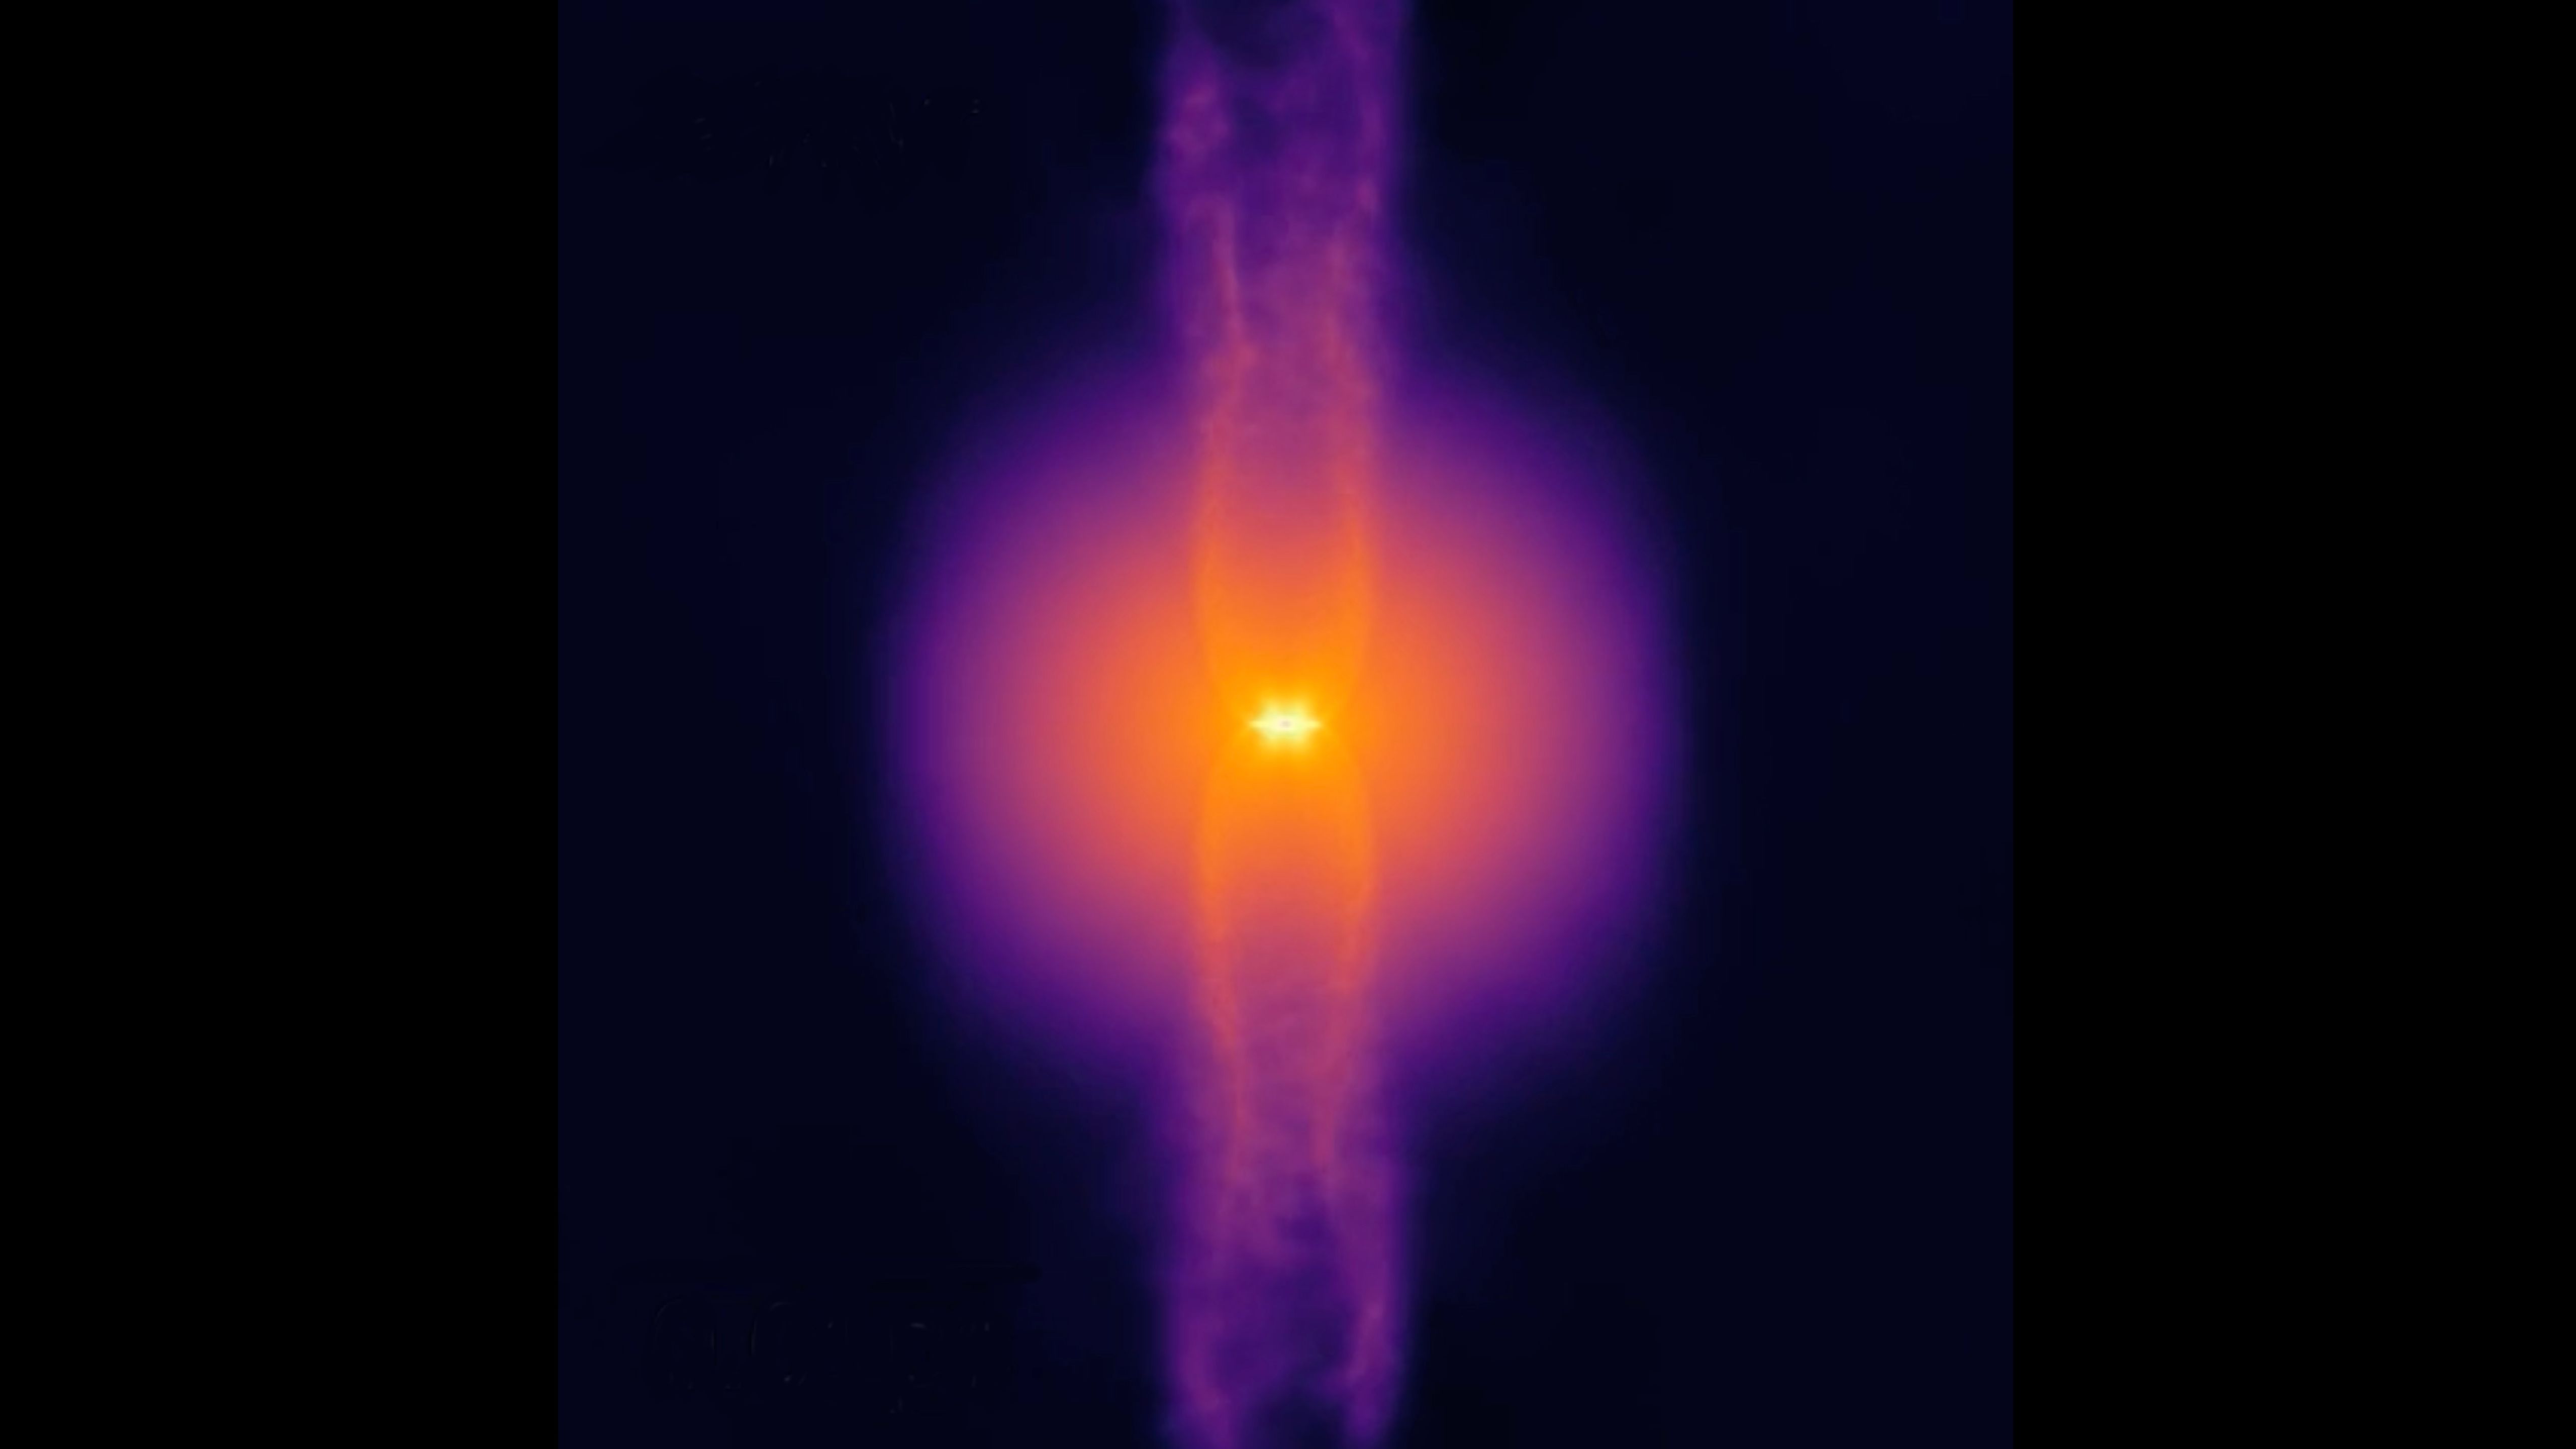 When a star forms, it launches jets of gas along its poles. This prevents the star from growing too large.